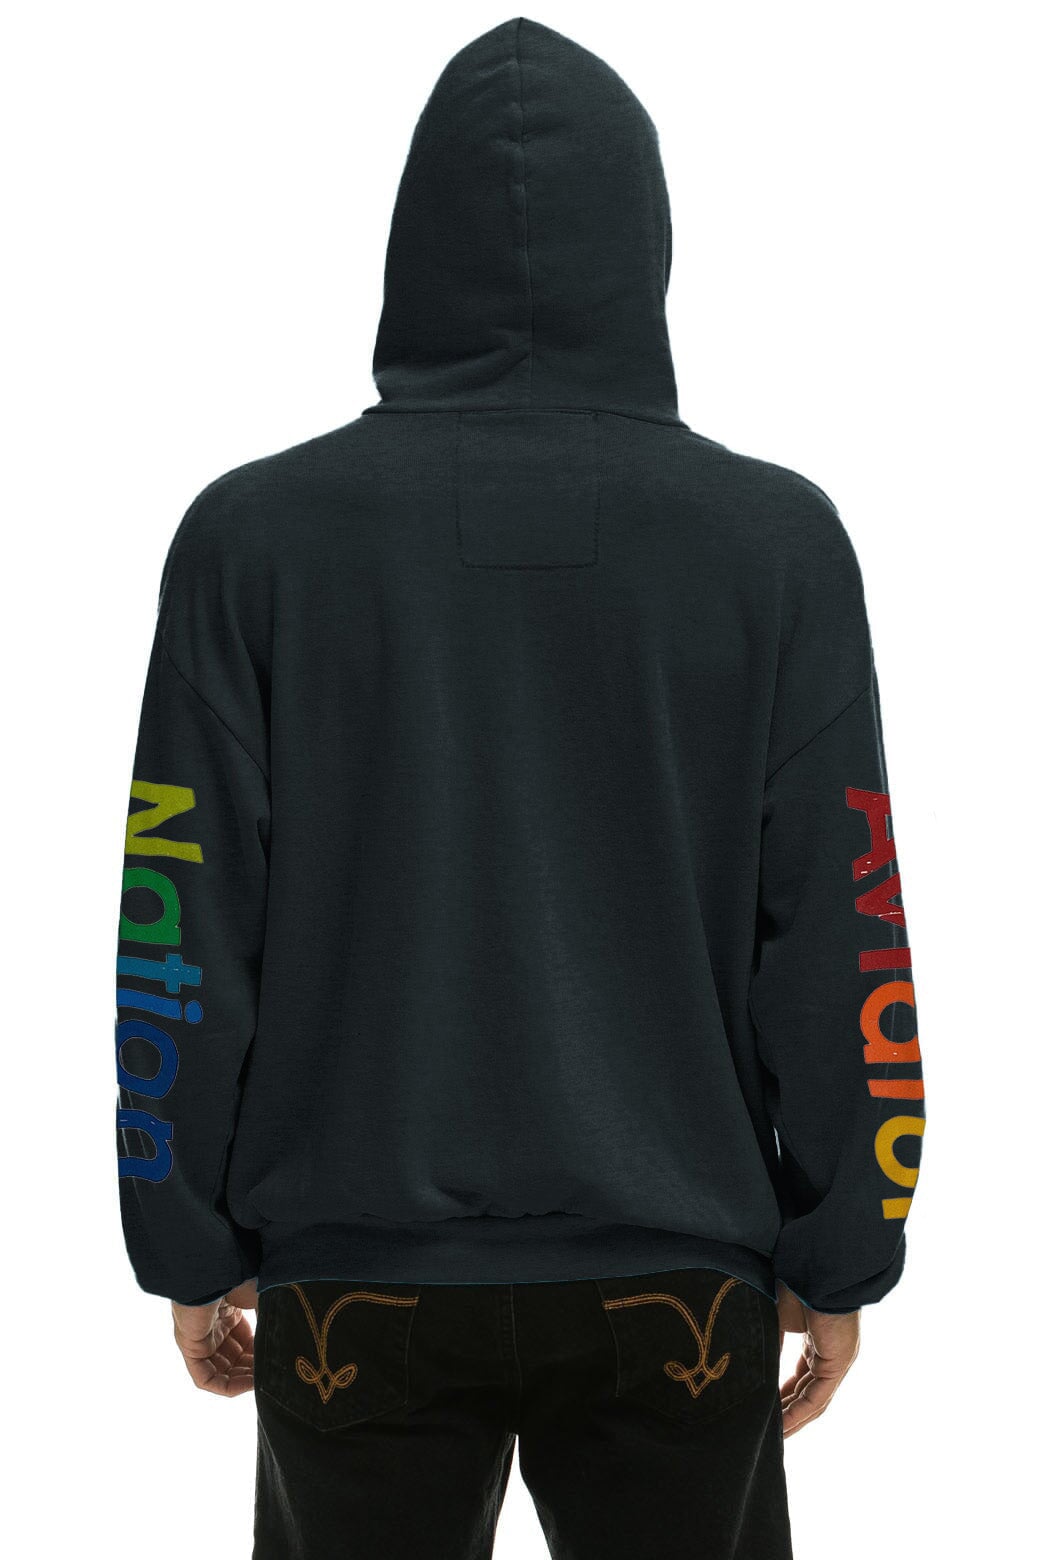 AVIATOR NATION AUSTIN RELAXED PULLOVER HOODIE - CHARCOAL Hoodie Aviator Nation 